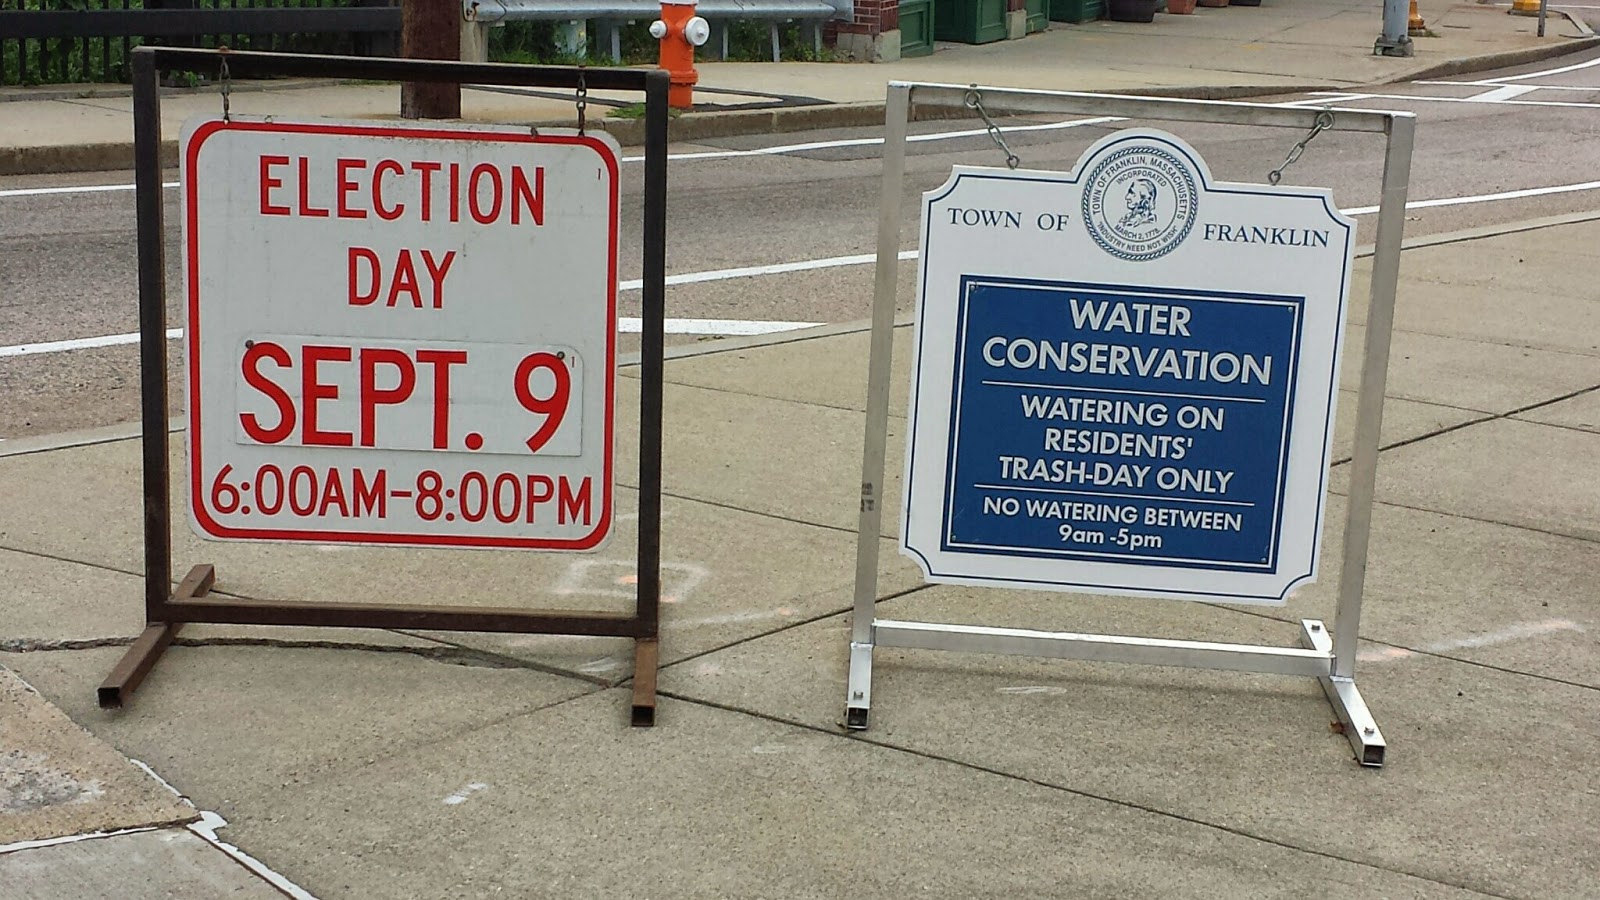 yes, the election has come and gone but the water conservation measures remain